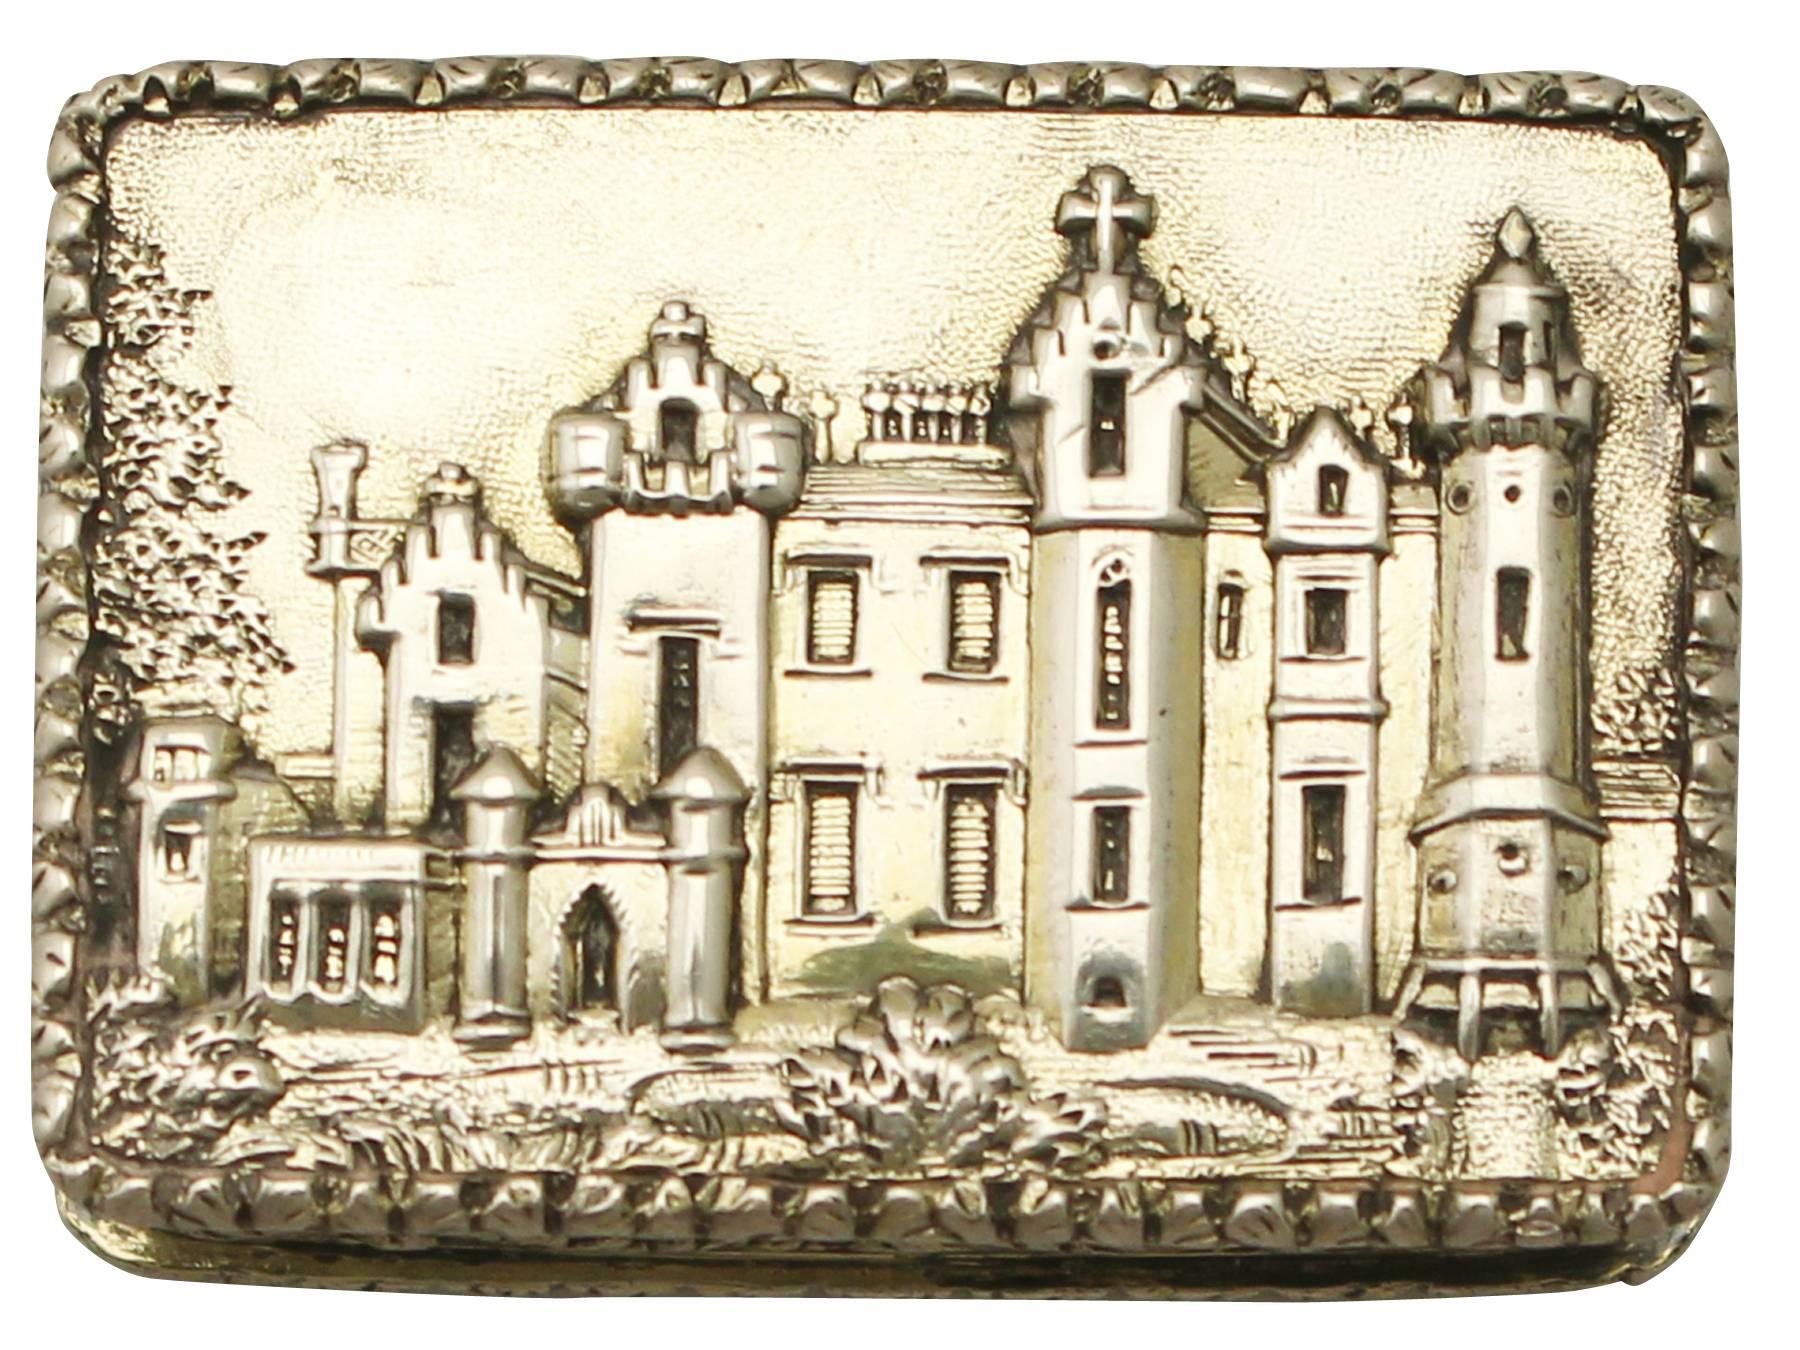 An exceptional, fine and impressive antique Victorian English sterling silver castle top vinaigrette depicting Abbotsford House, an addition to our collectable box collection.

This exceptional antique silver vinaigrette has a rectangular form